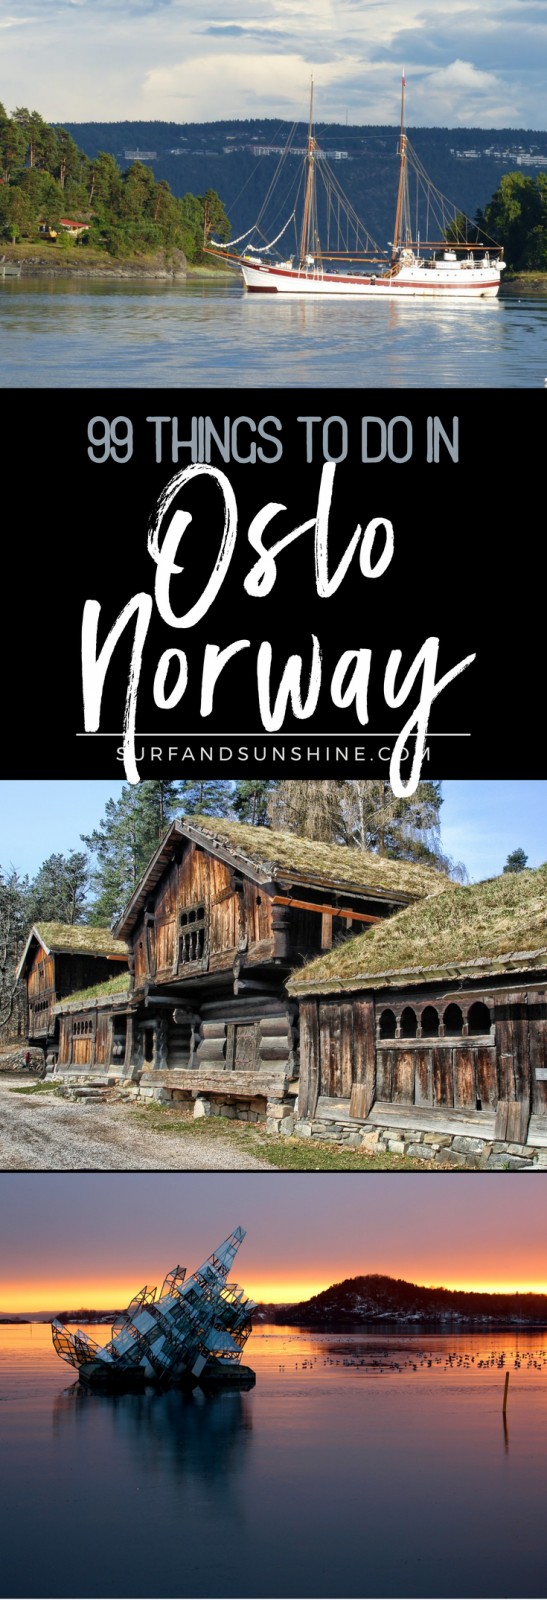 99 things to do in oslo norway twitter